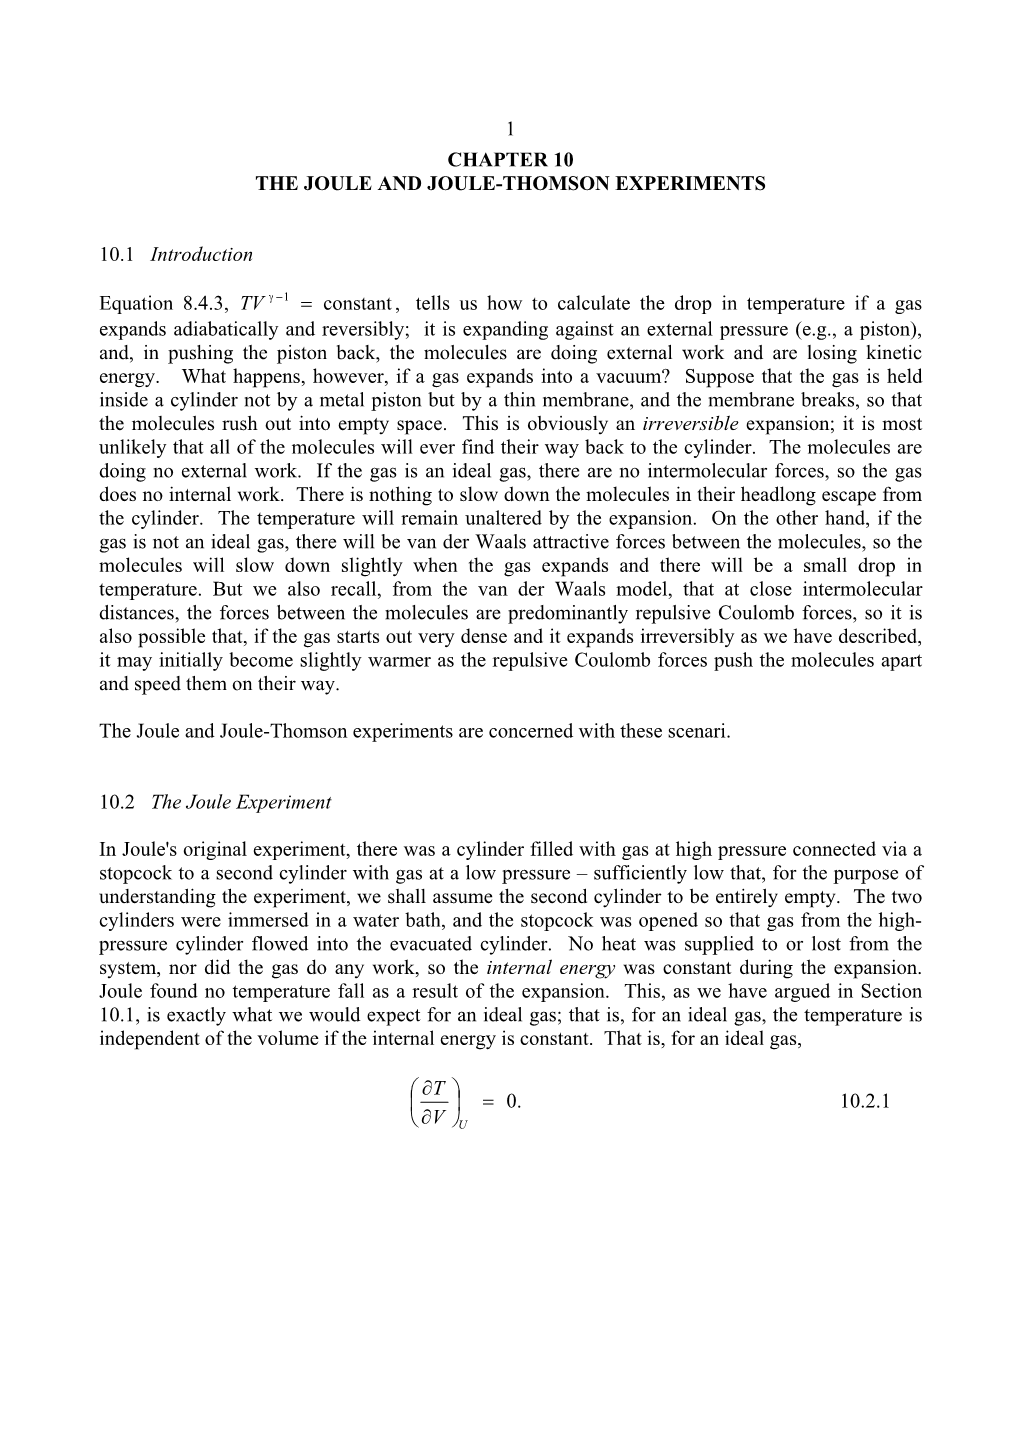 1 Chapter 10 the Joule and Joule-Thomson Experiments